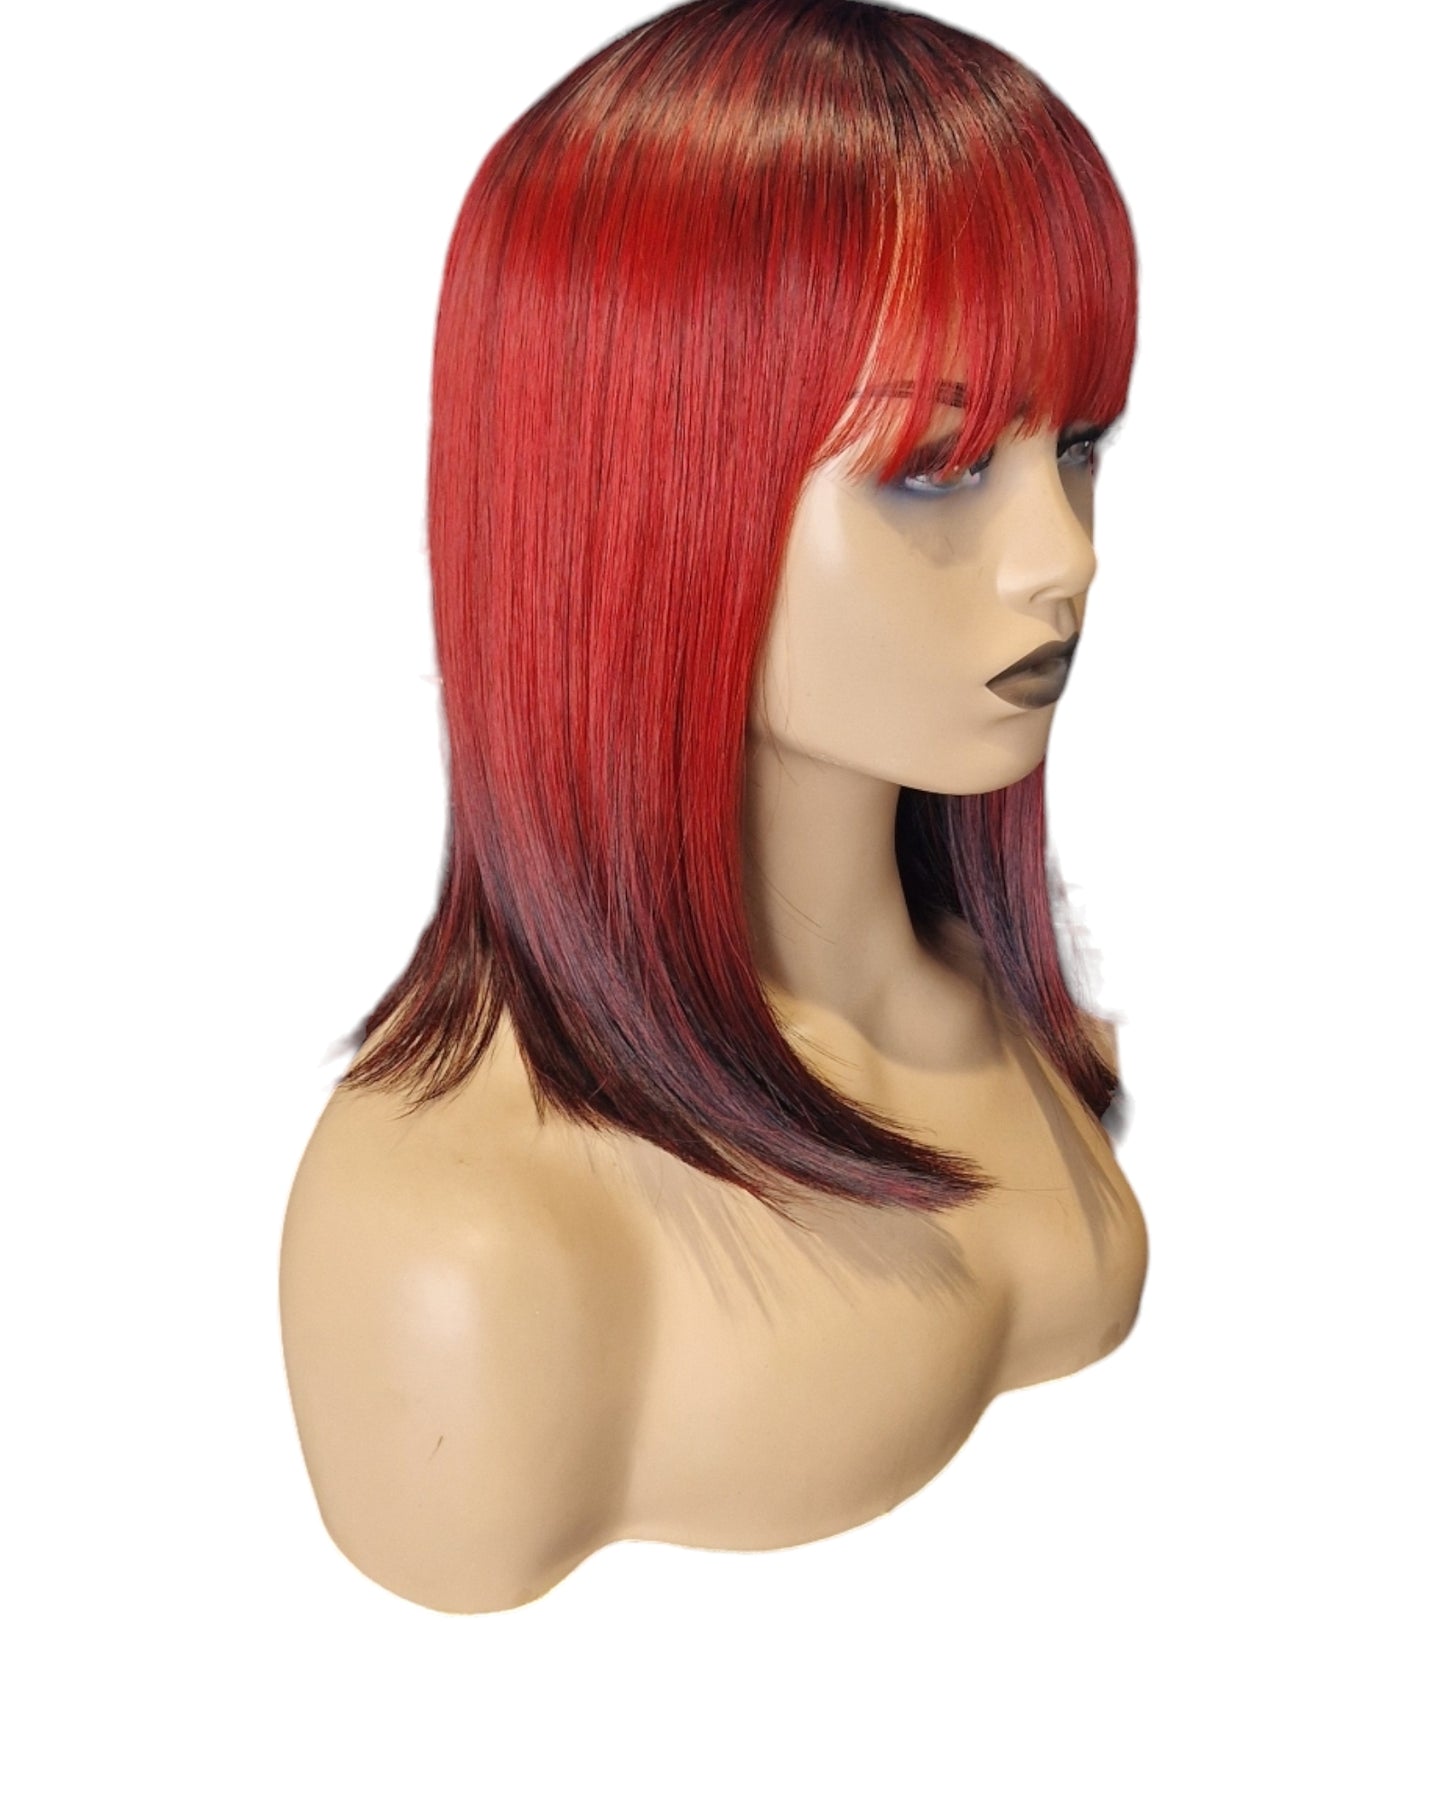 Red Ombre Bobbed Hairstyle Wig. Katy.